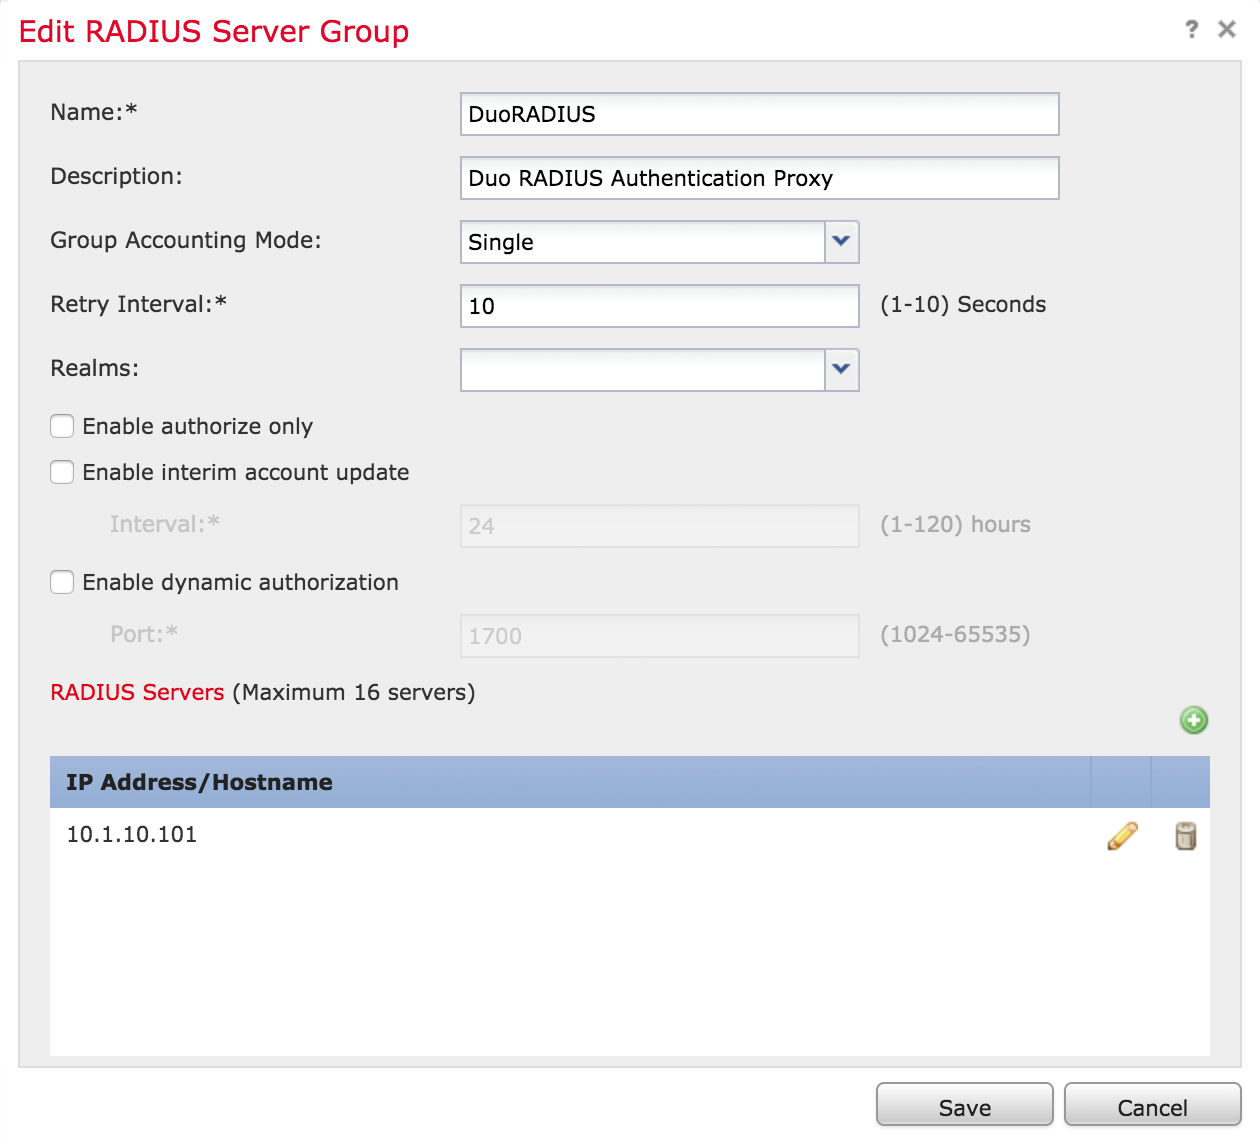 FMC Completed Add RADIUS Server Group Form